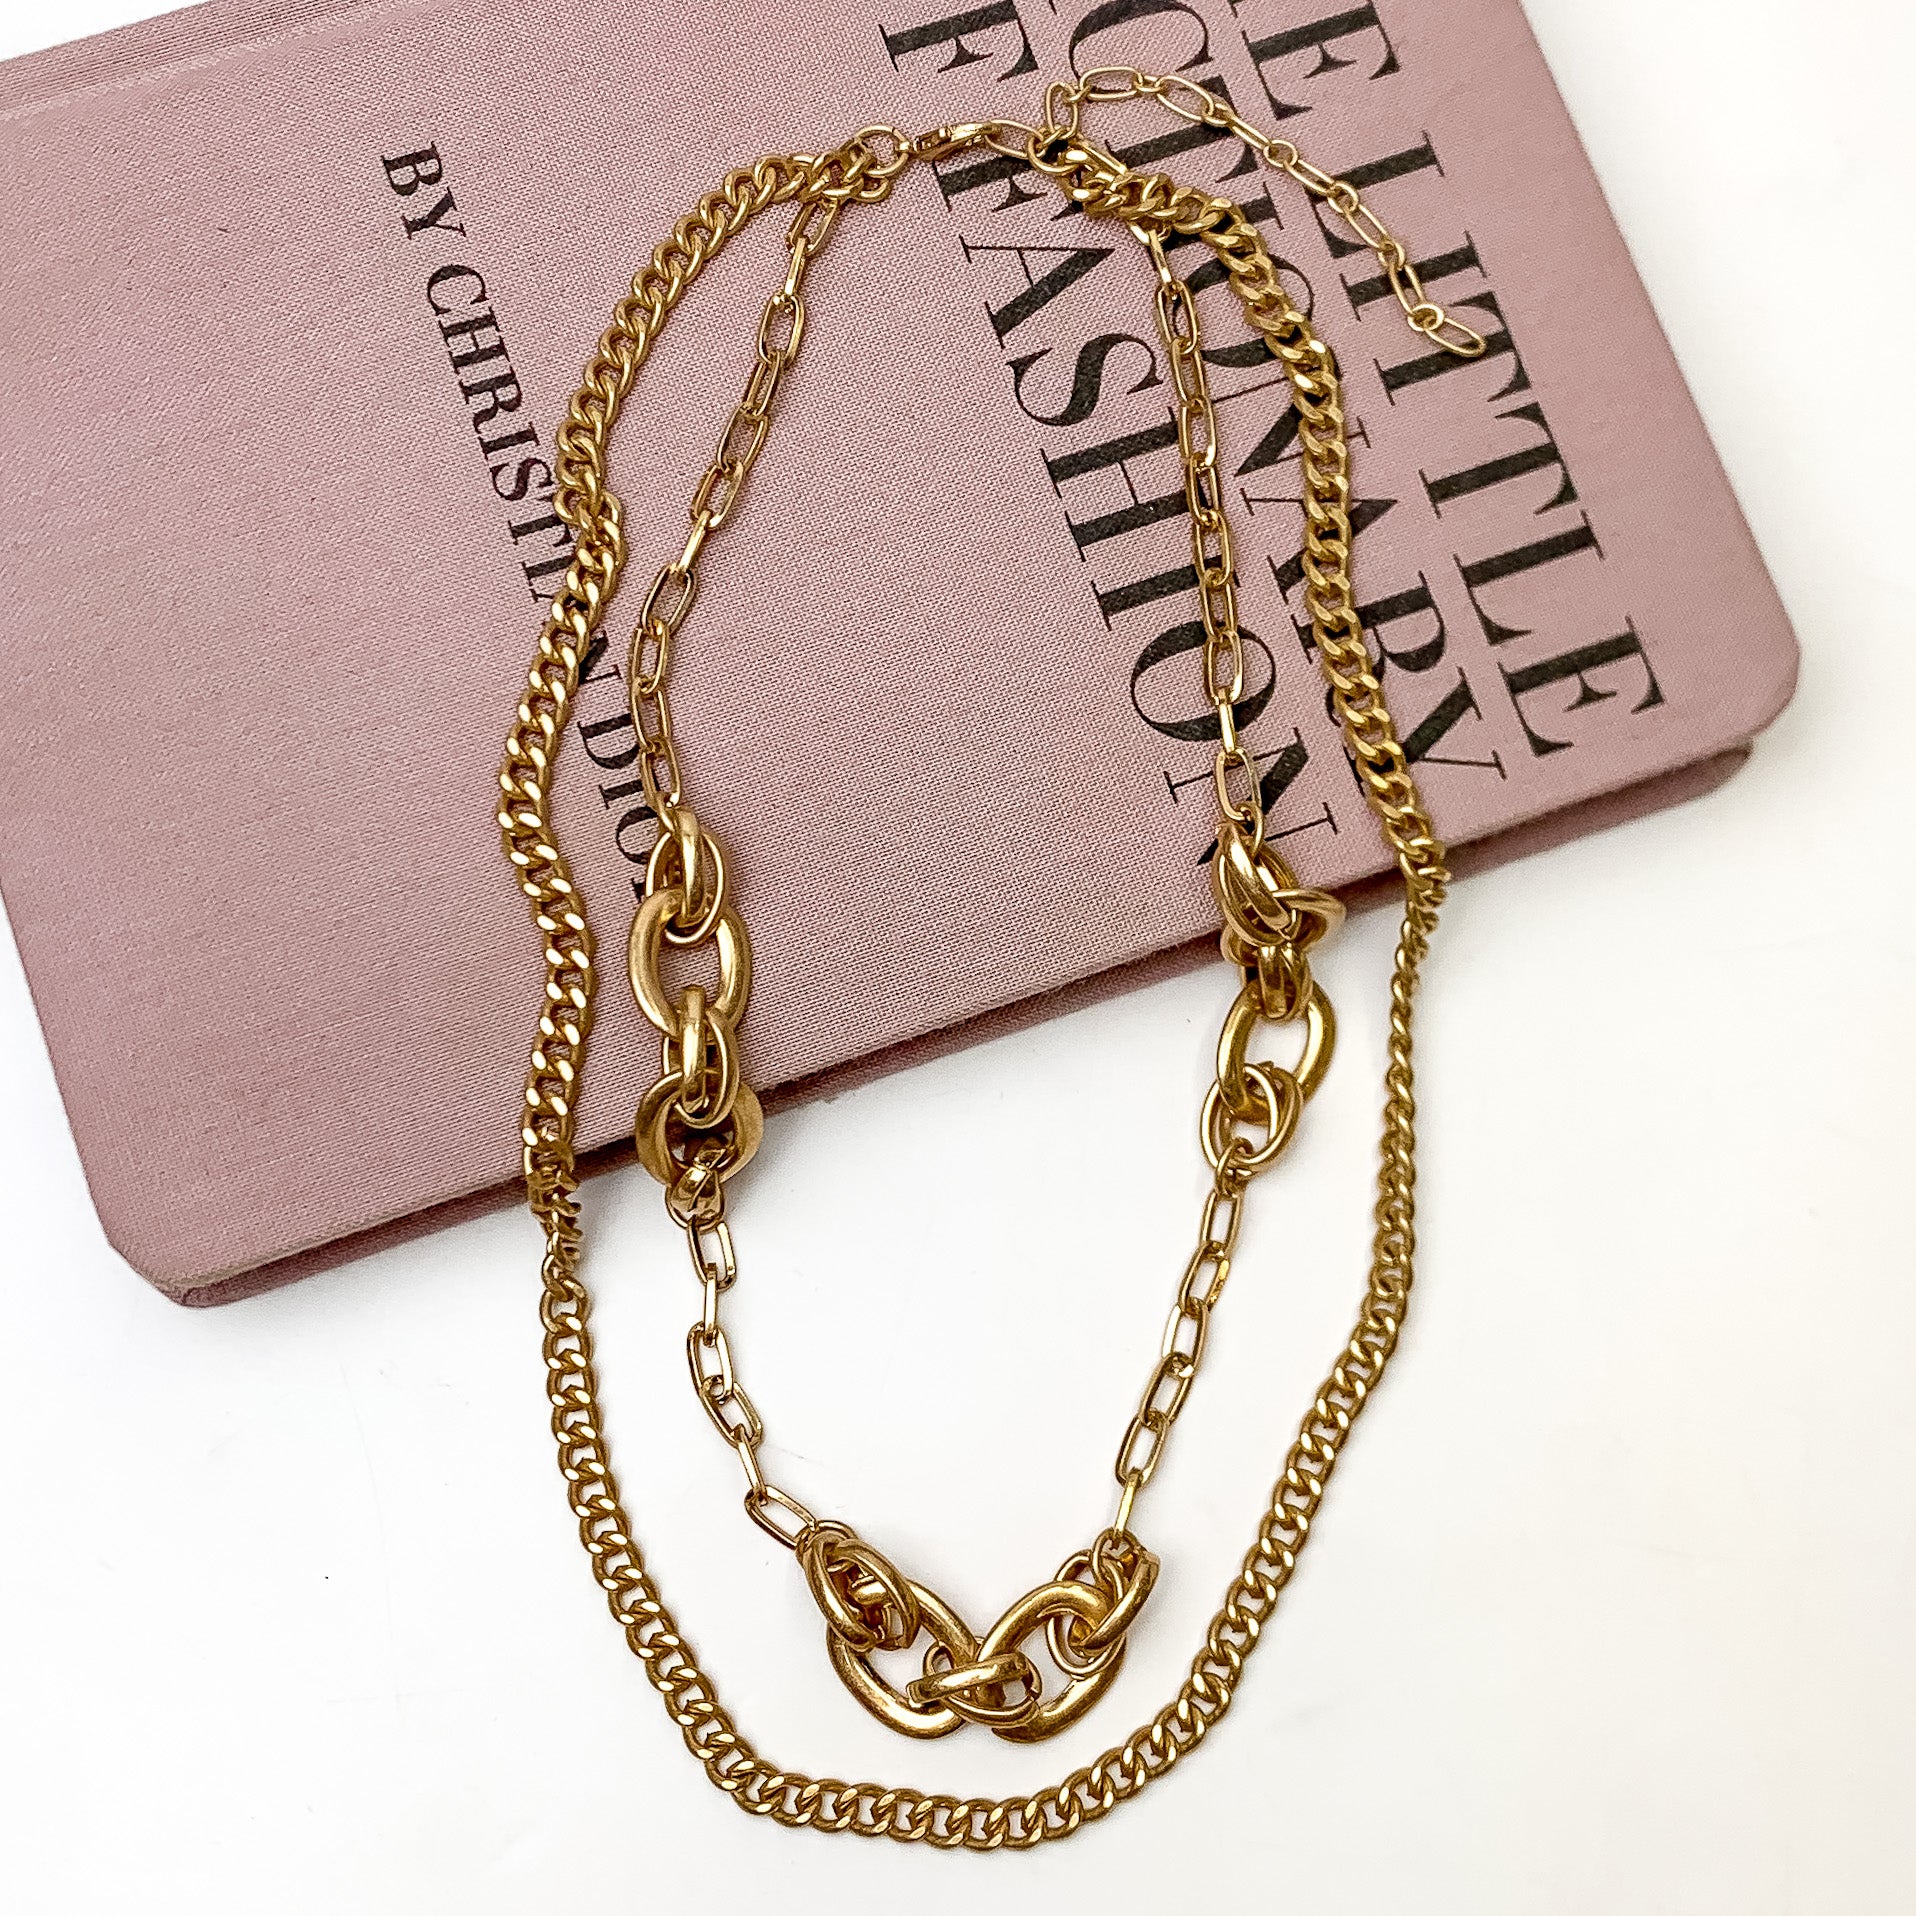 Pictured is a gold, double layered chain necklace. This necklace is pictured laying partially on a mauve book on a white background.  